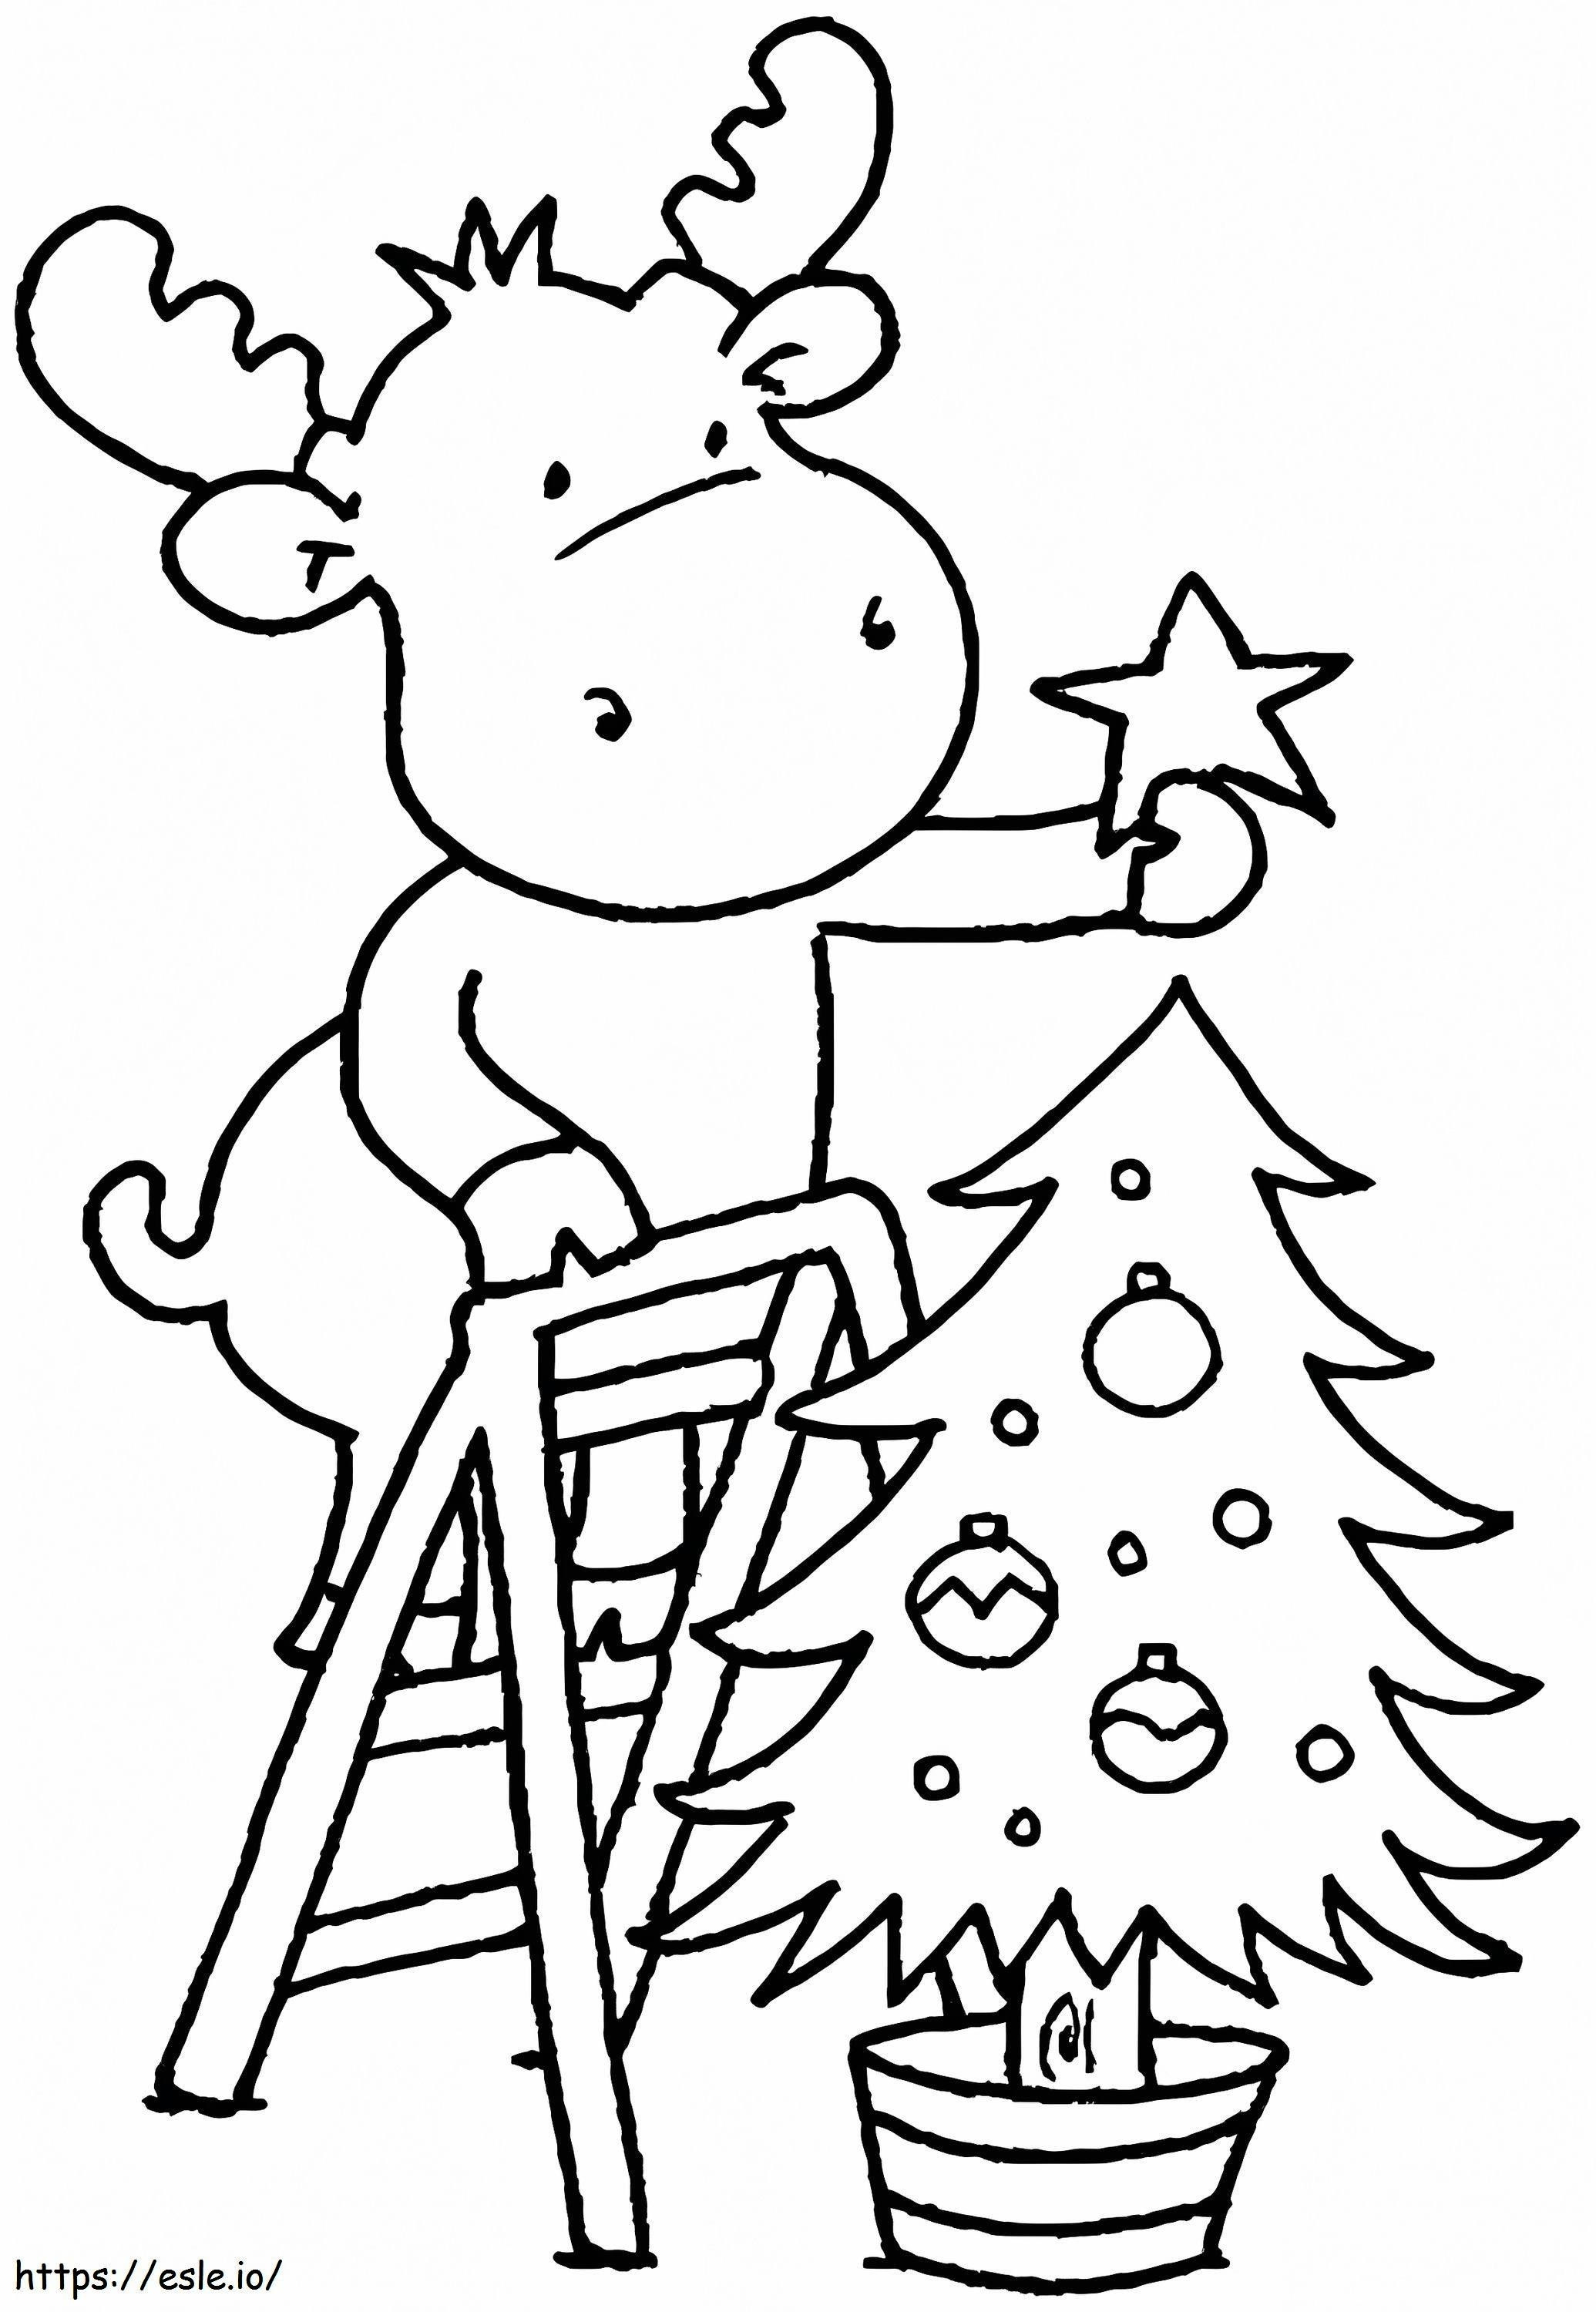 Reindeer Christmas Tree Decoration coloring page